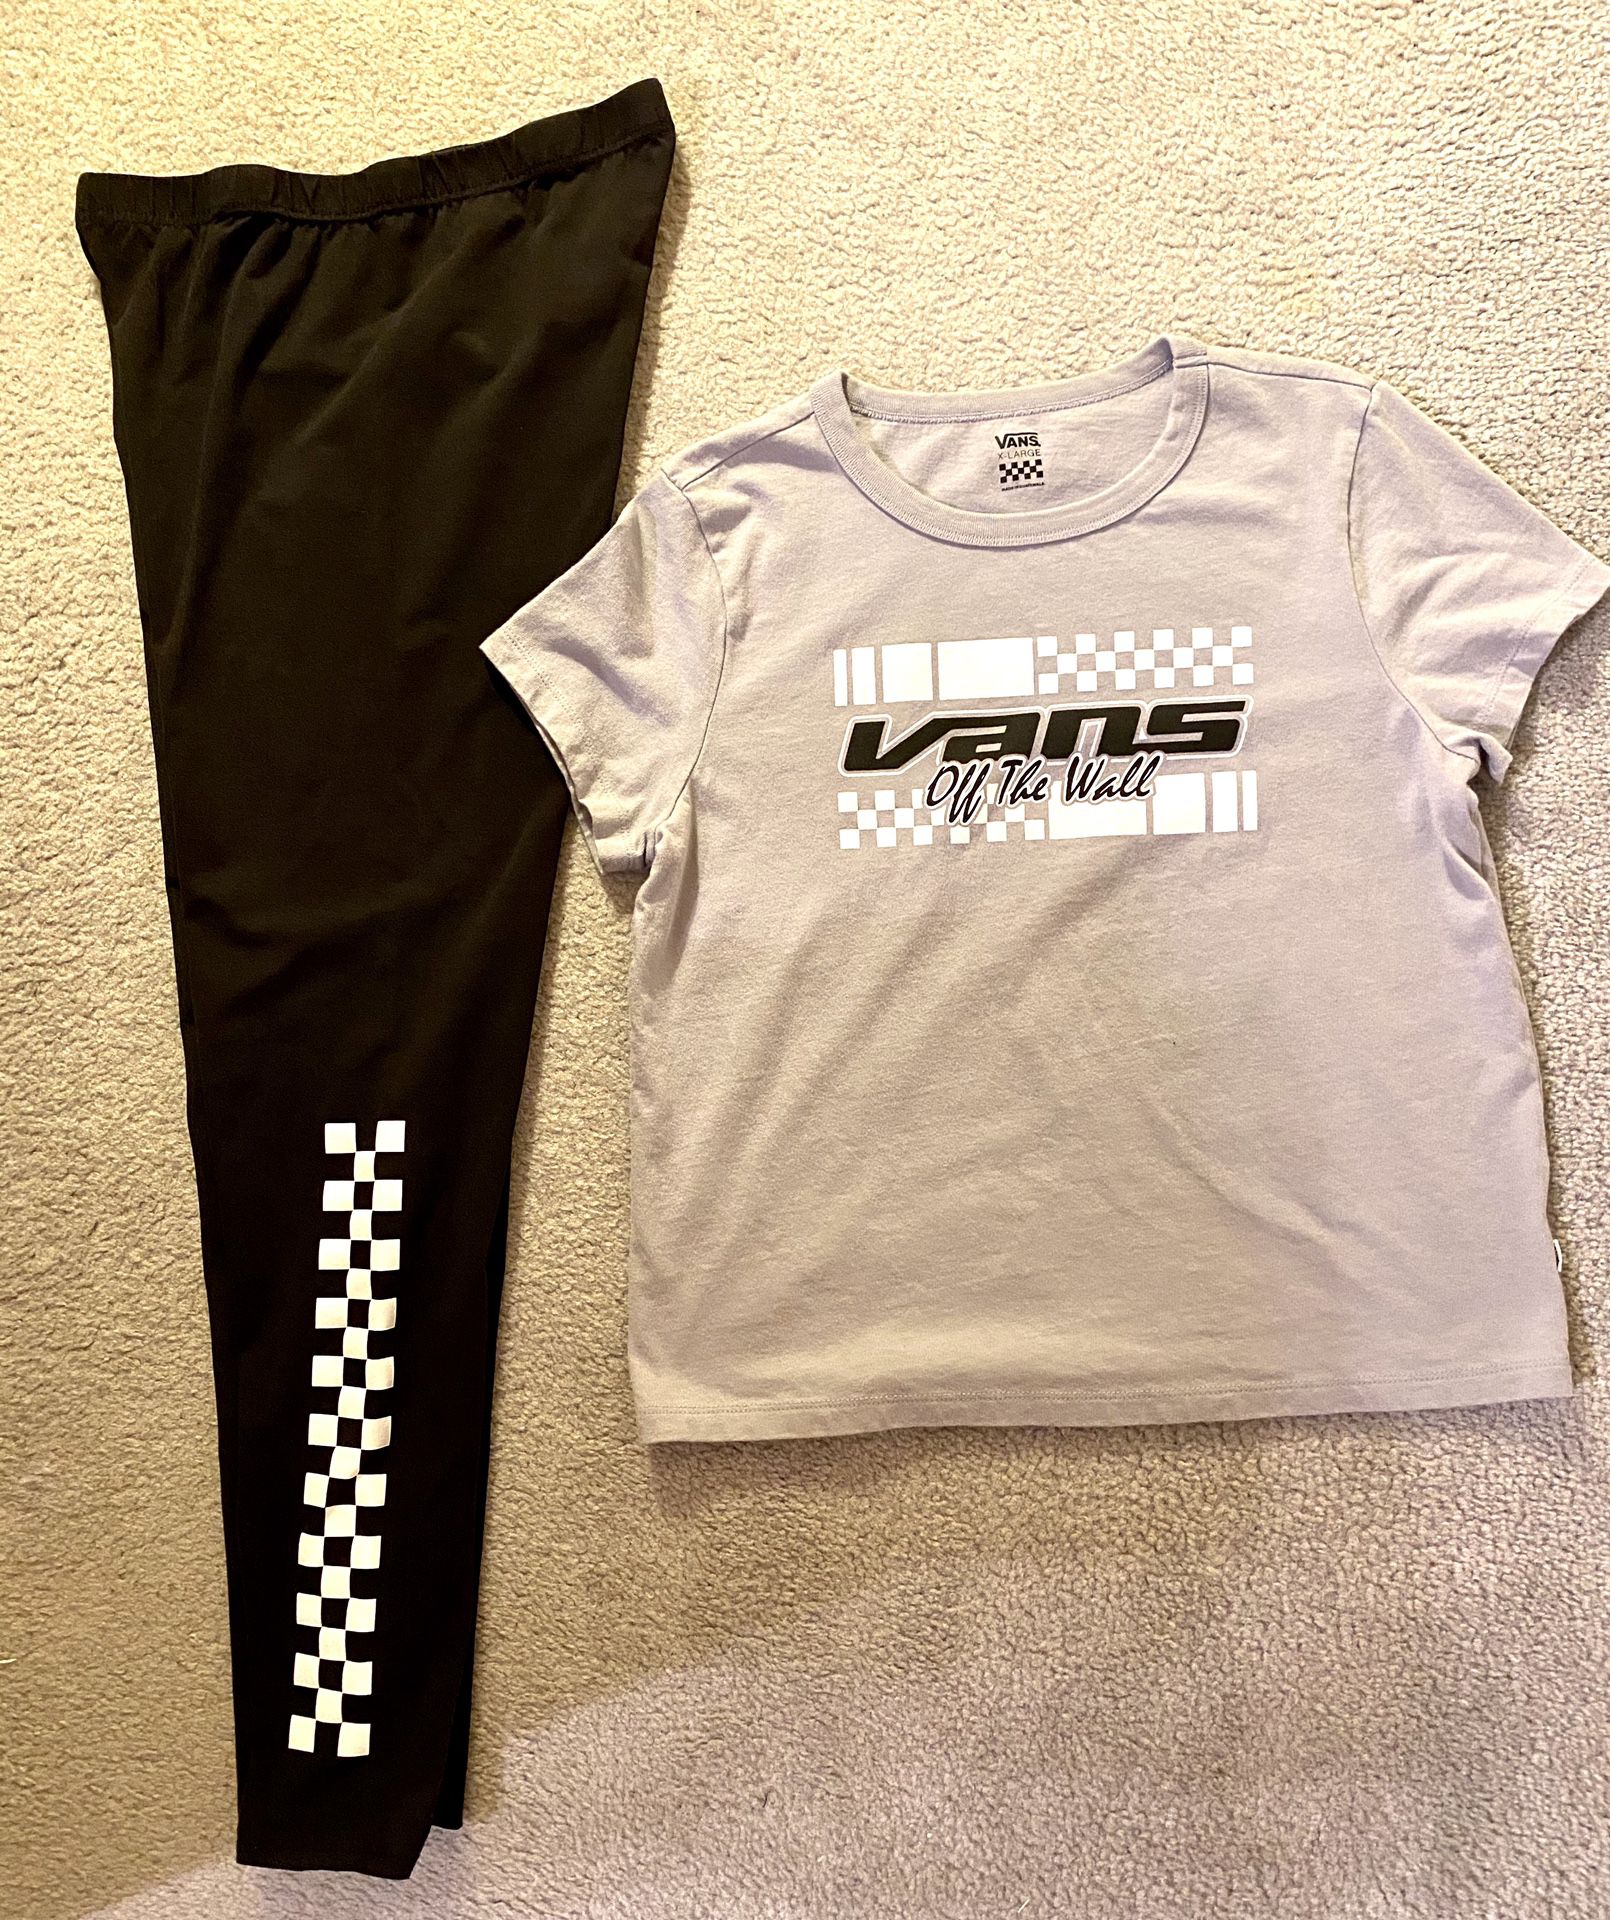 Women’s Vans brand outfit - leggings and a shirt - Size L